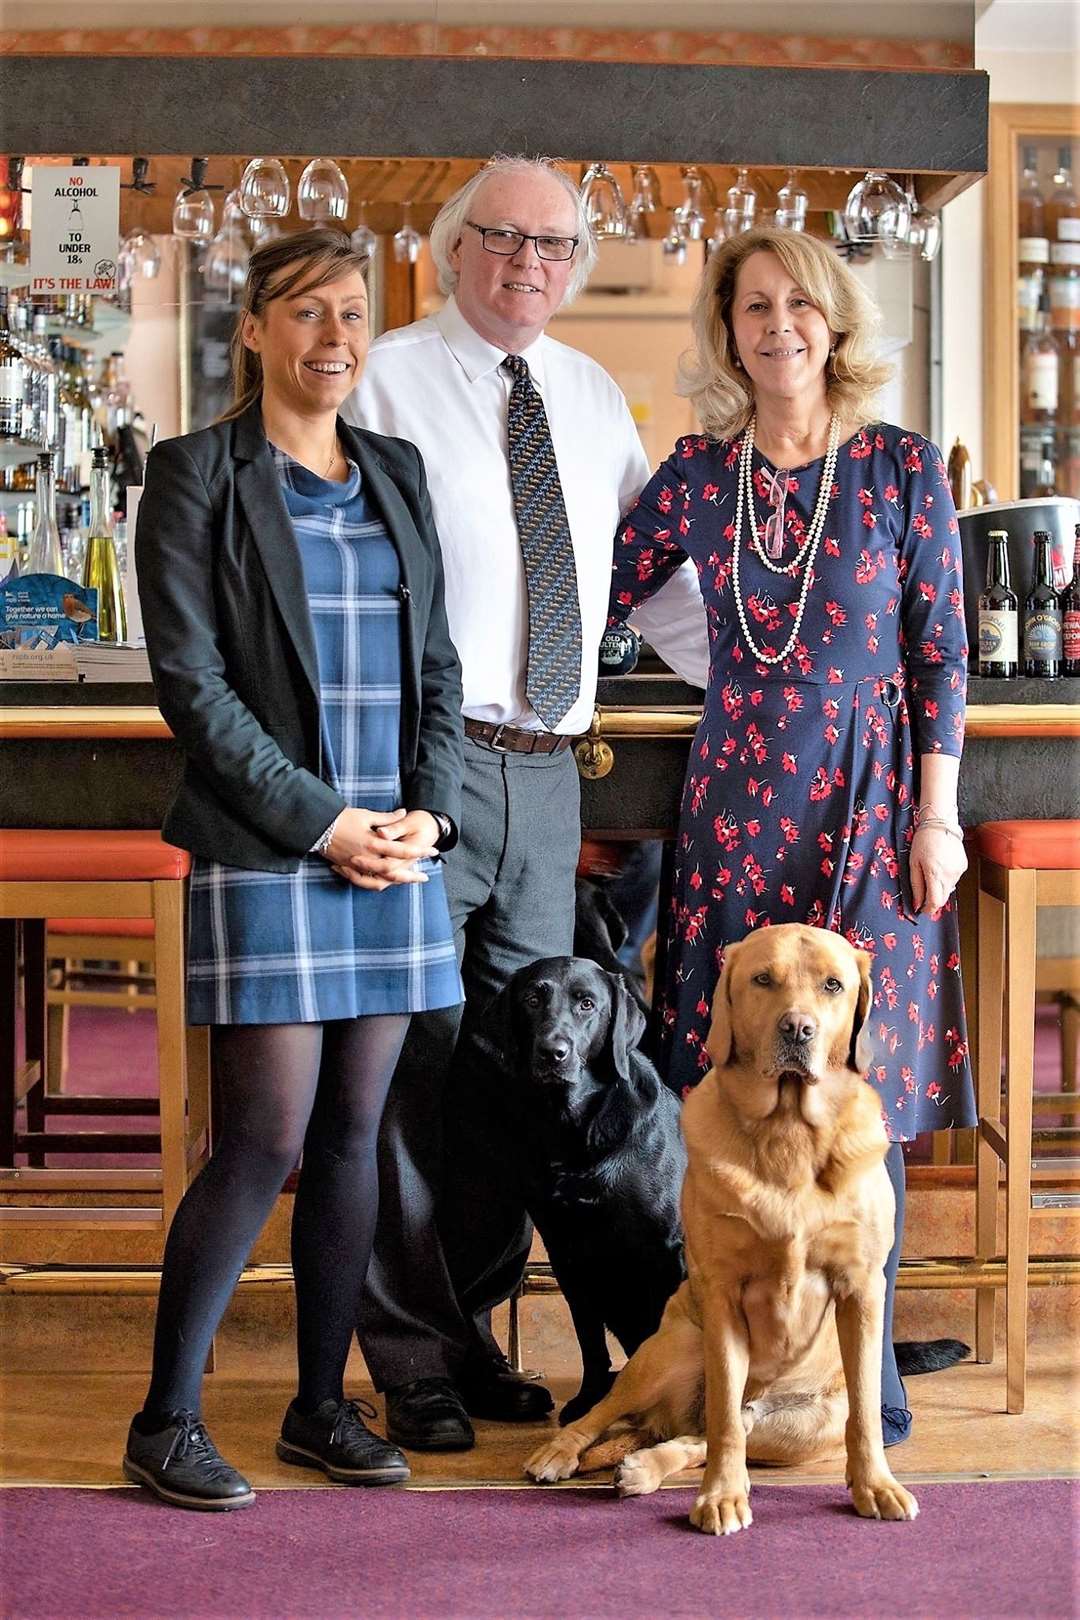 The Lamont family at Mackays Hotel – Jennifer, Murray and Ellie, together with dogs Bria and Max.